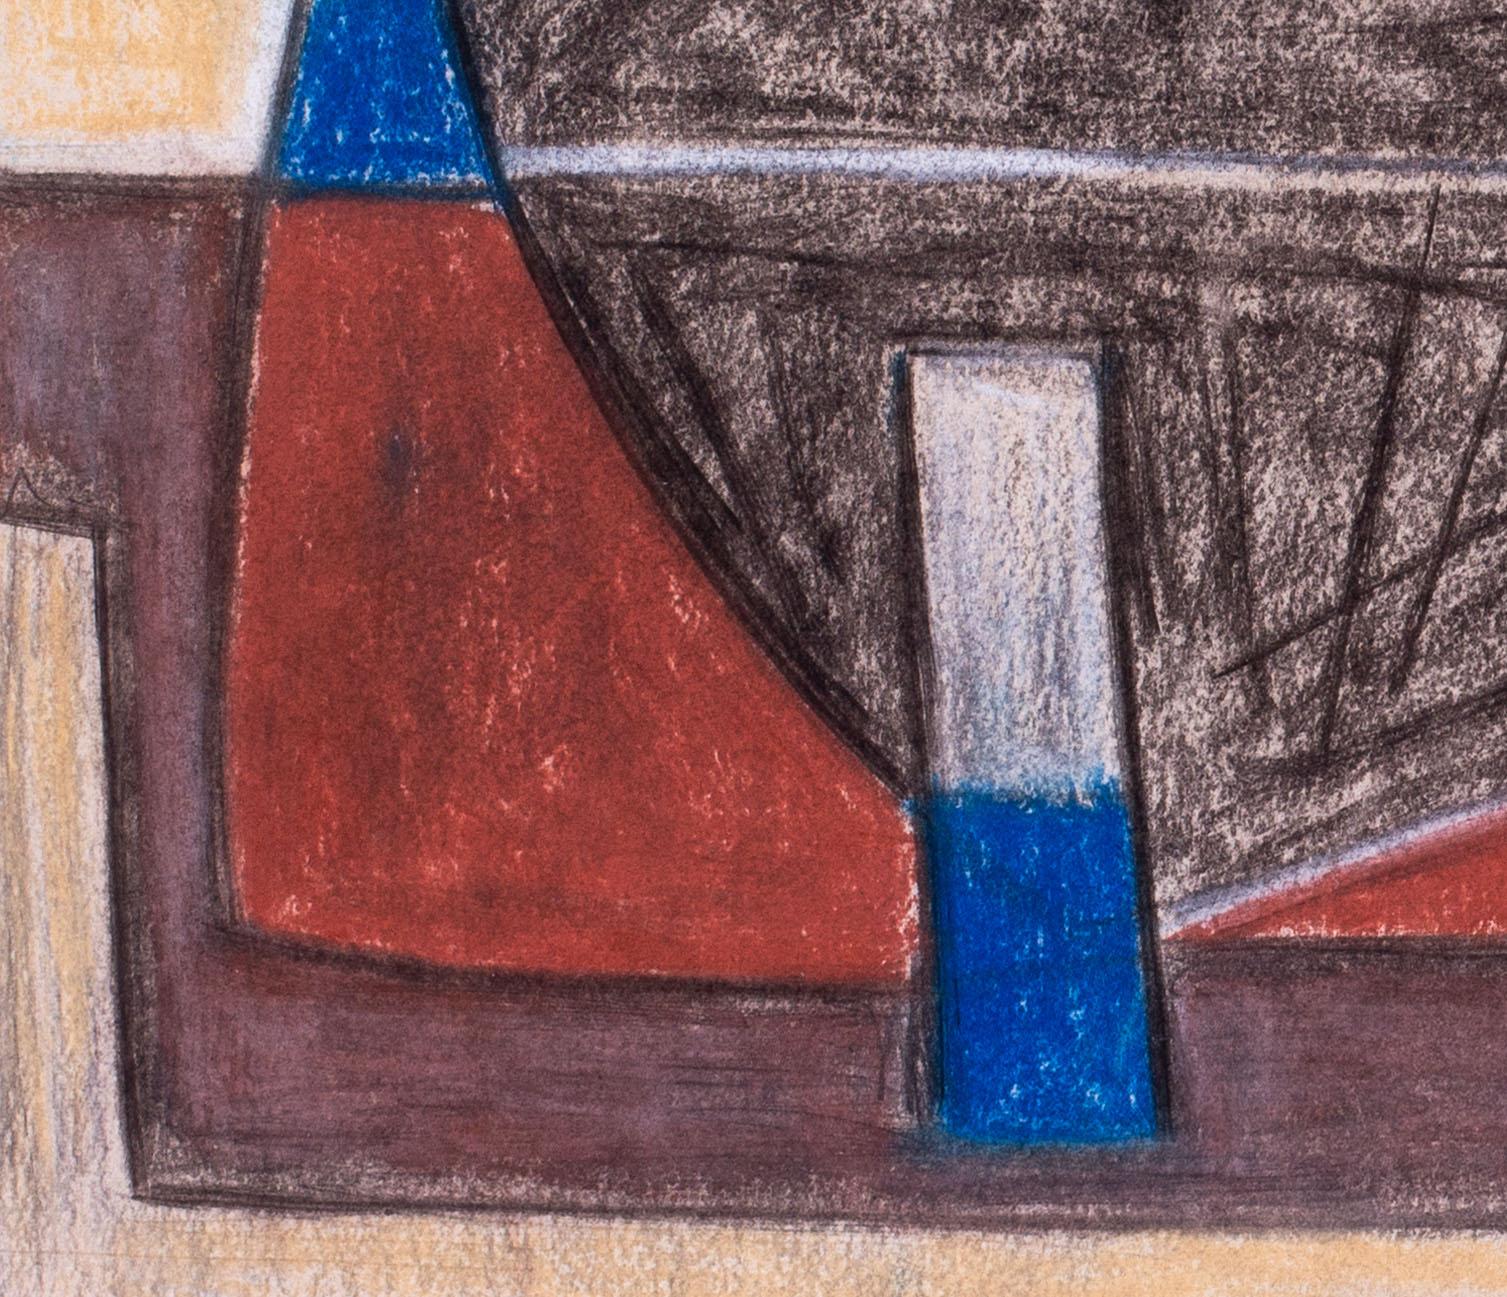 Jean Signovert (French, 1919 – 1981)
Composition, 57
Pencil and pastel on paper
Signed and dated ‘JS. J. Signovert 57’ (lower right)
13.1/2 x 20.1/8 in. (34.3 x 51cm.)

Jean Signovert (1919-1981) is a French painter and engraver. He has studied at